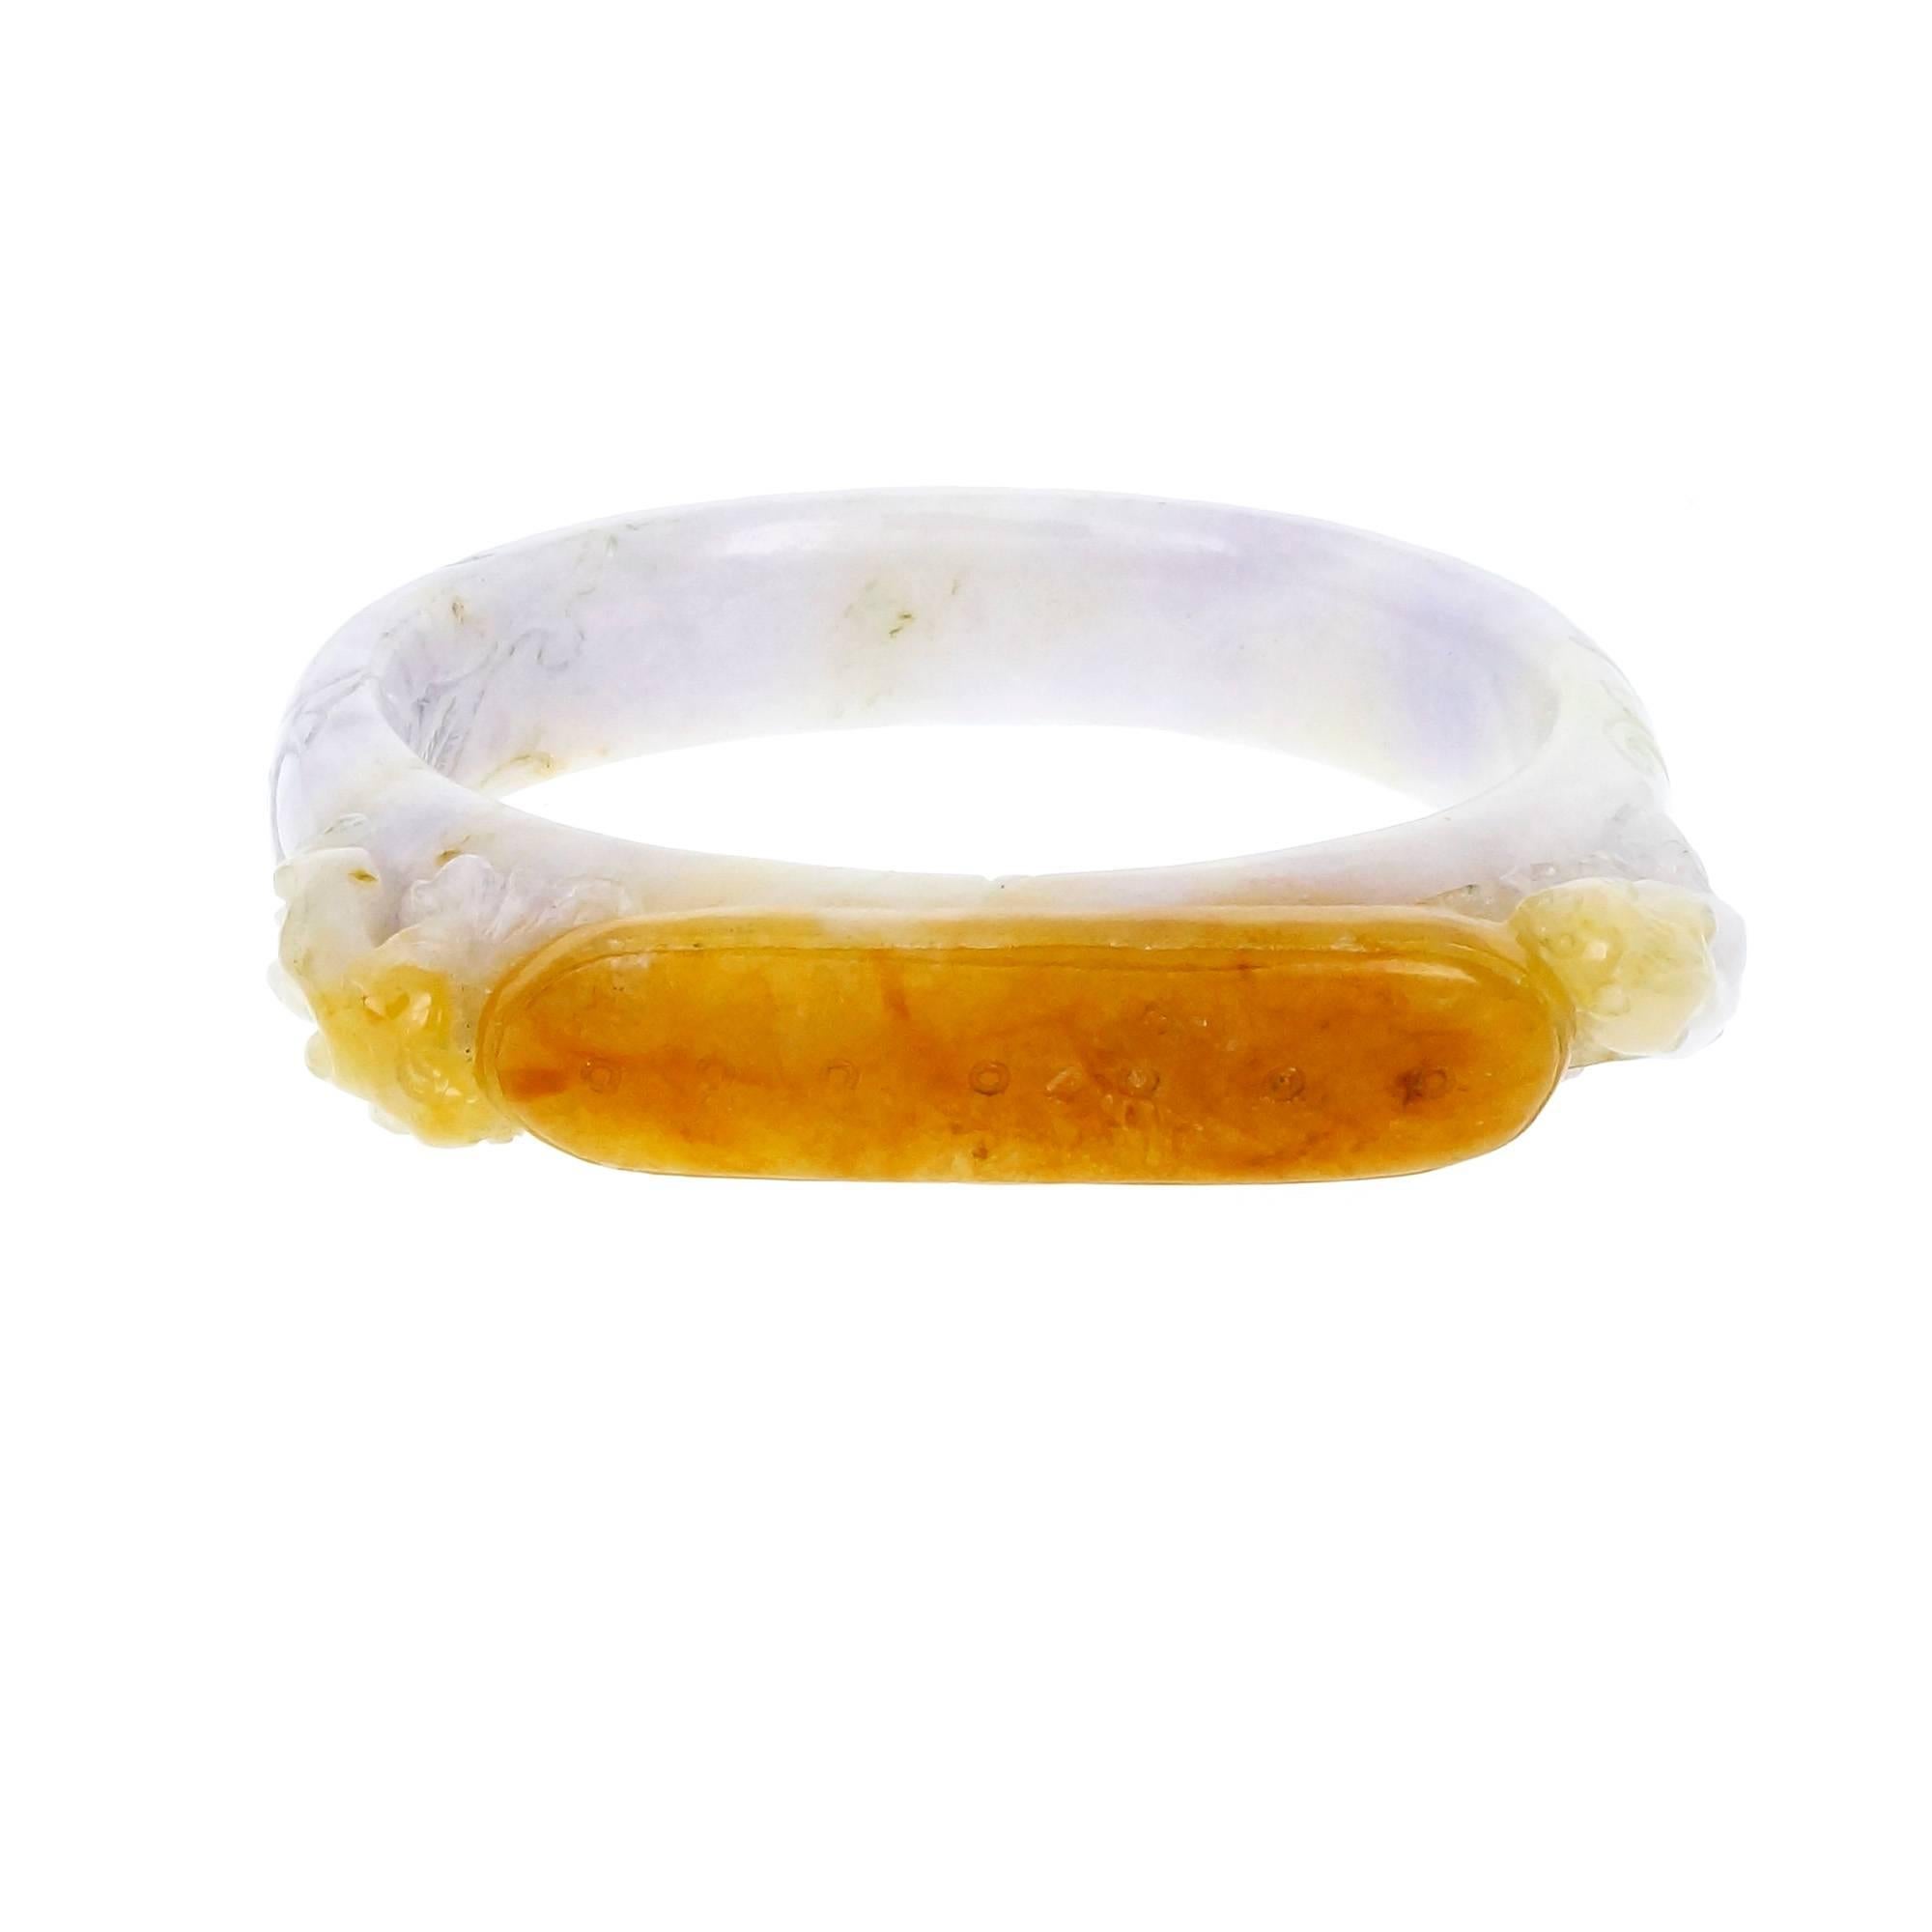 Natural Jadeite Jade GIA certified saddle style bangle bracelet. Variegated brown and purple color, carved animals and center plaque. Inside circumference 6.5 inches, will fit over a small hand.

1 variegated brown and purple Jadeite Jade bangle